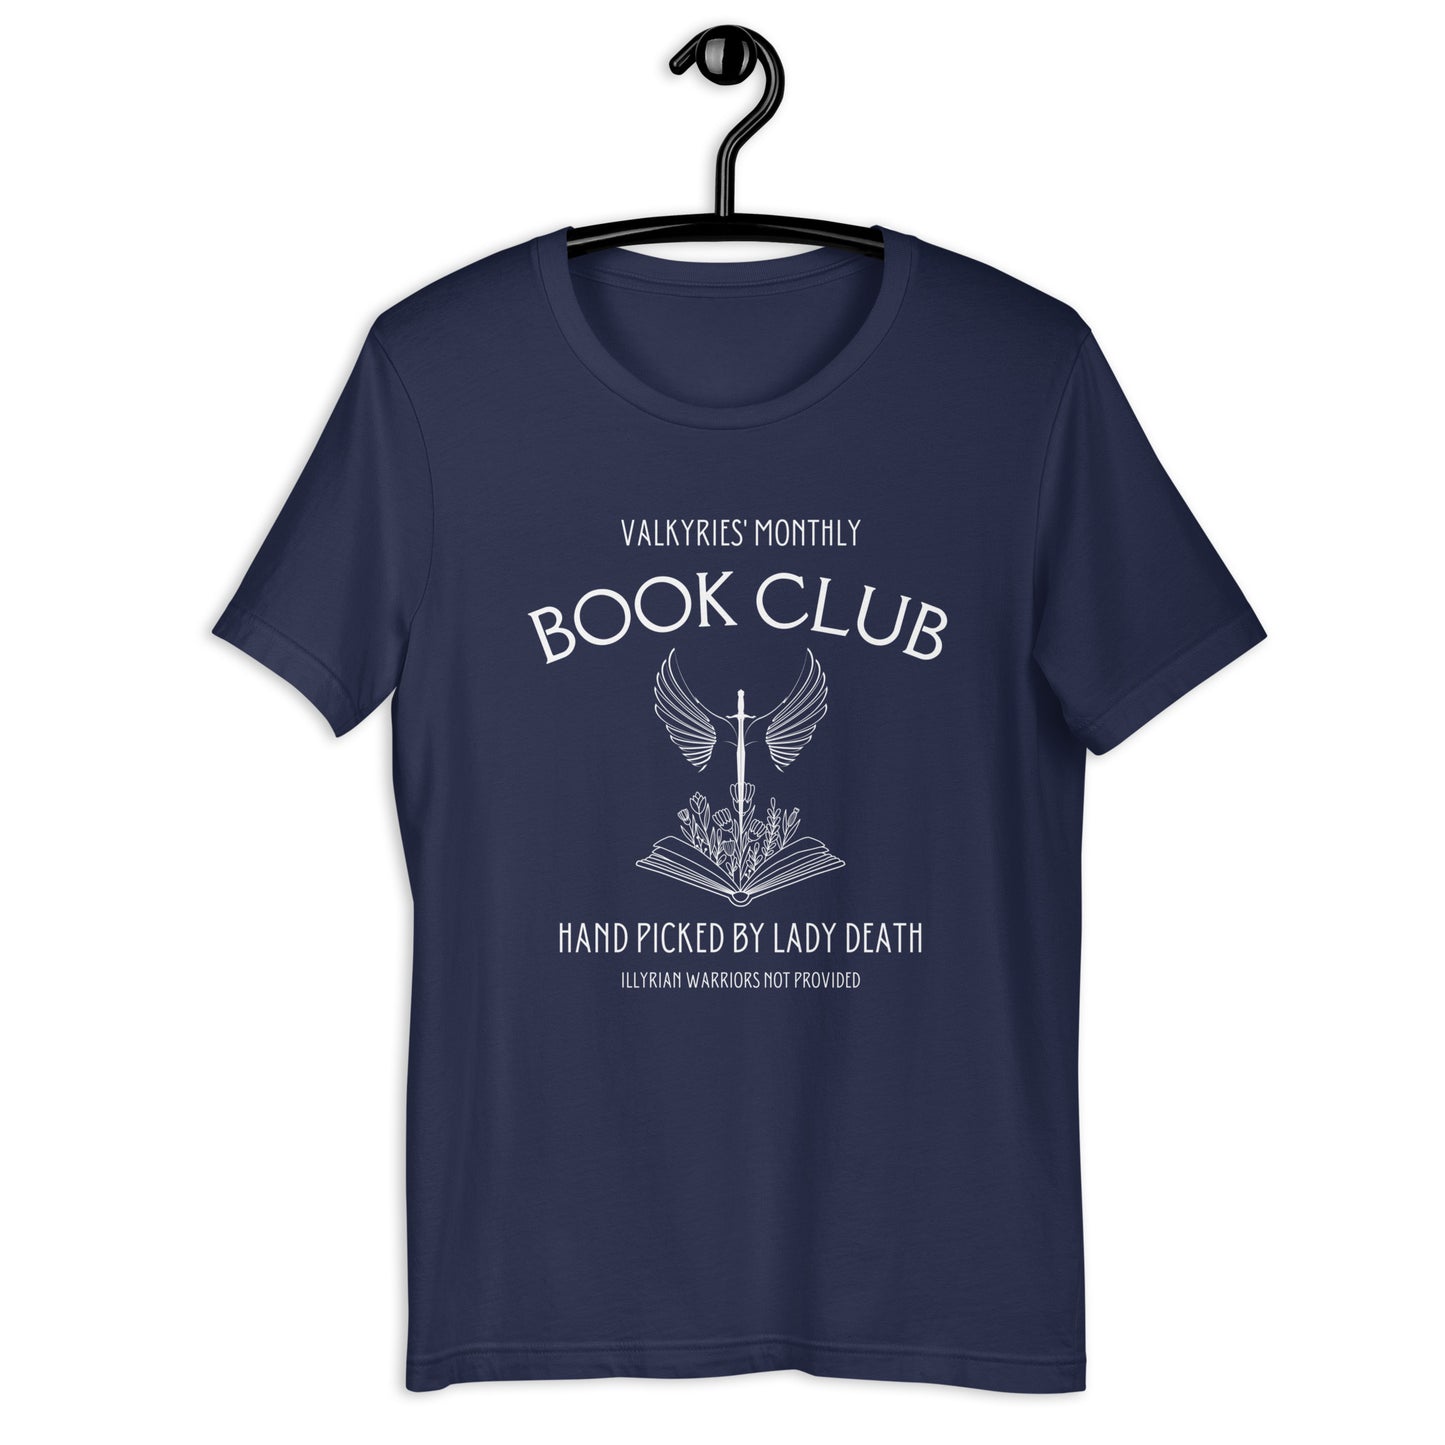 Valkyries' Monthly Book Club Shirt